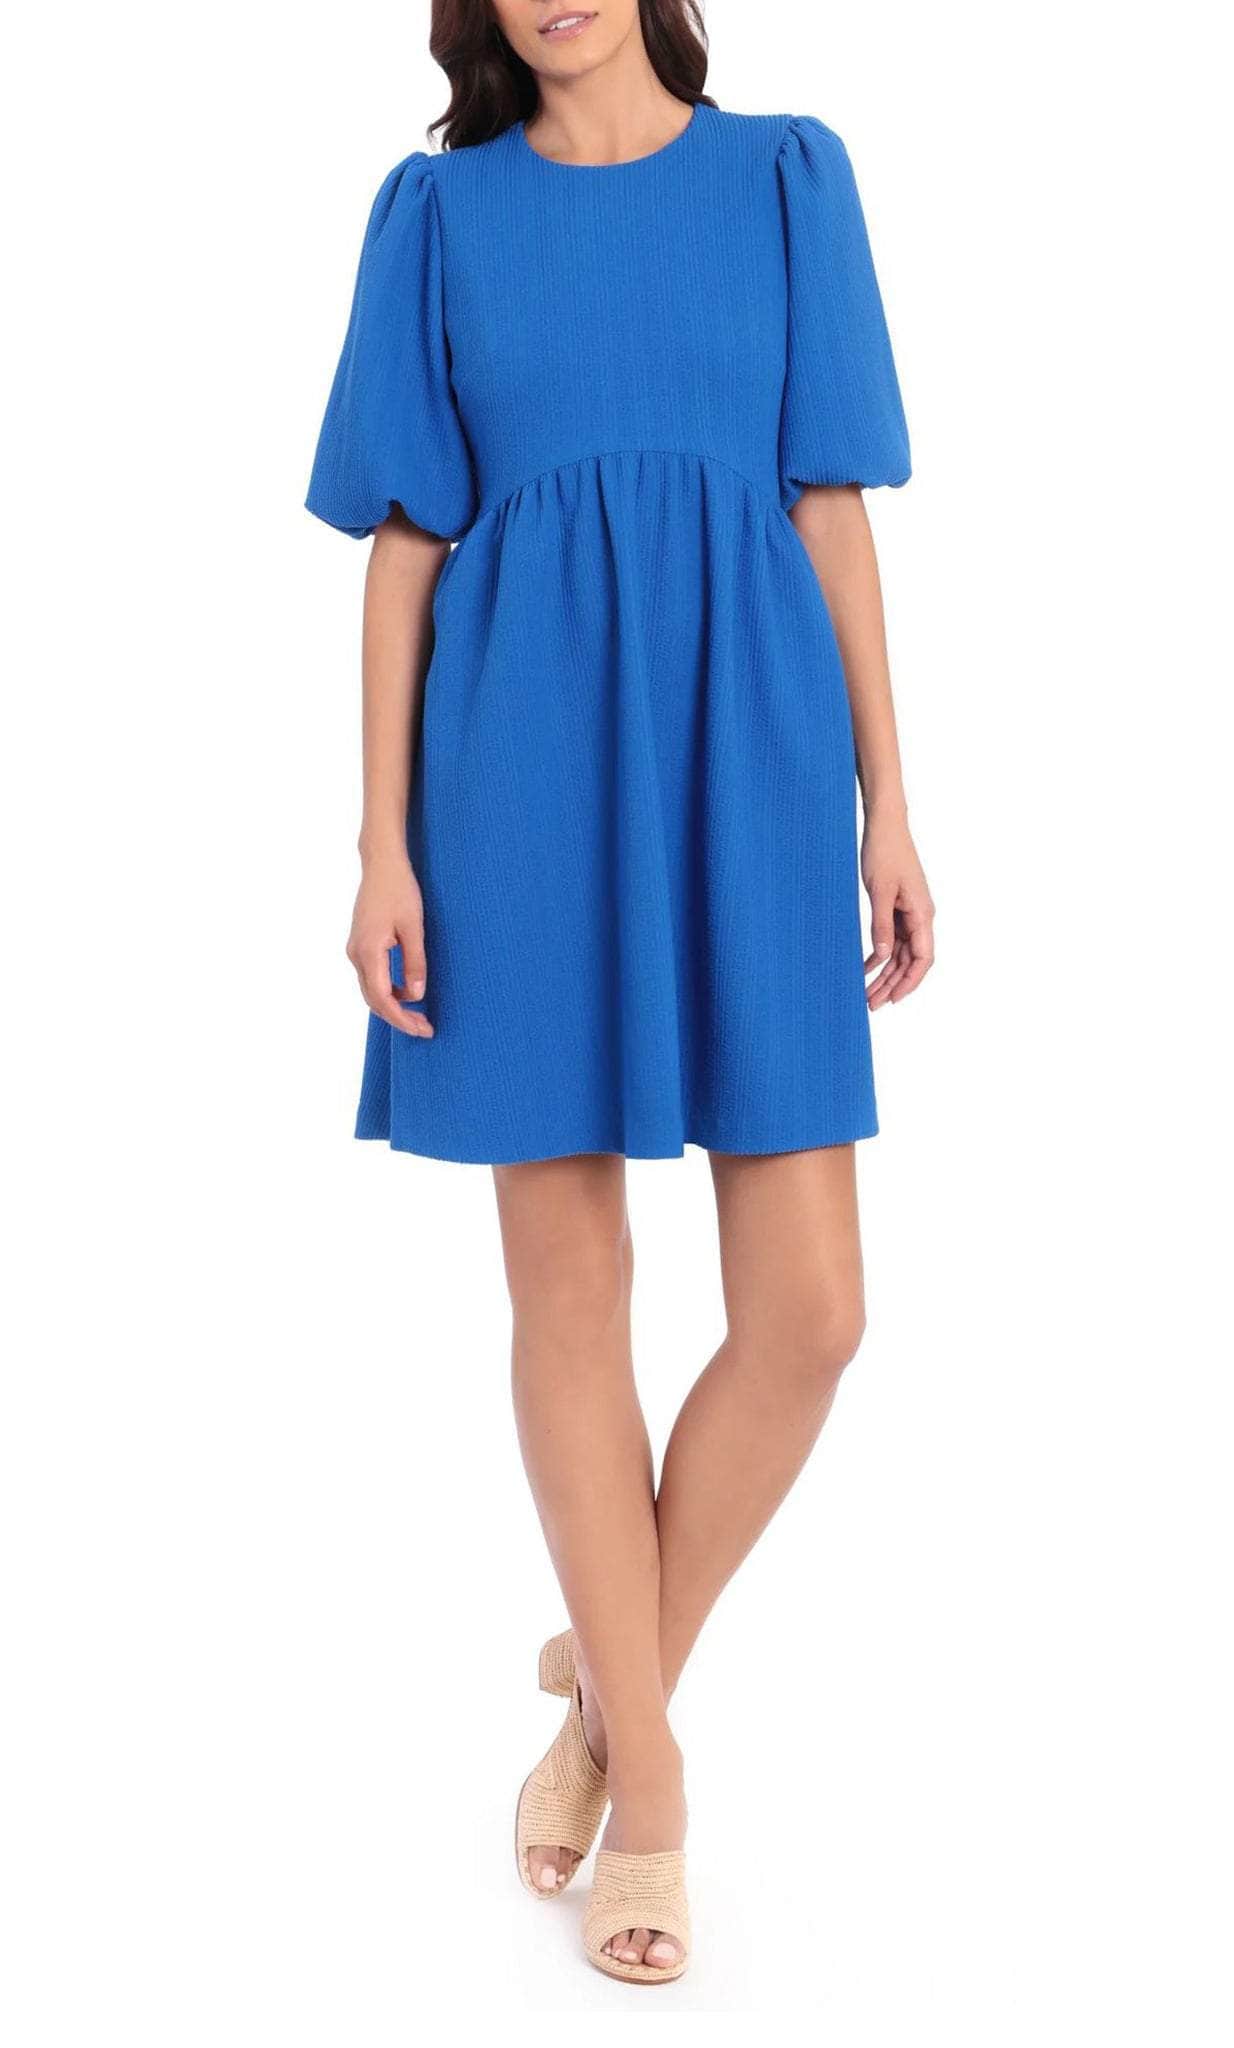 Maggy London G4879M - Short Puff Sleeve A-Line Dress Party Dresses